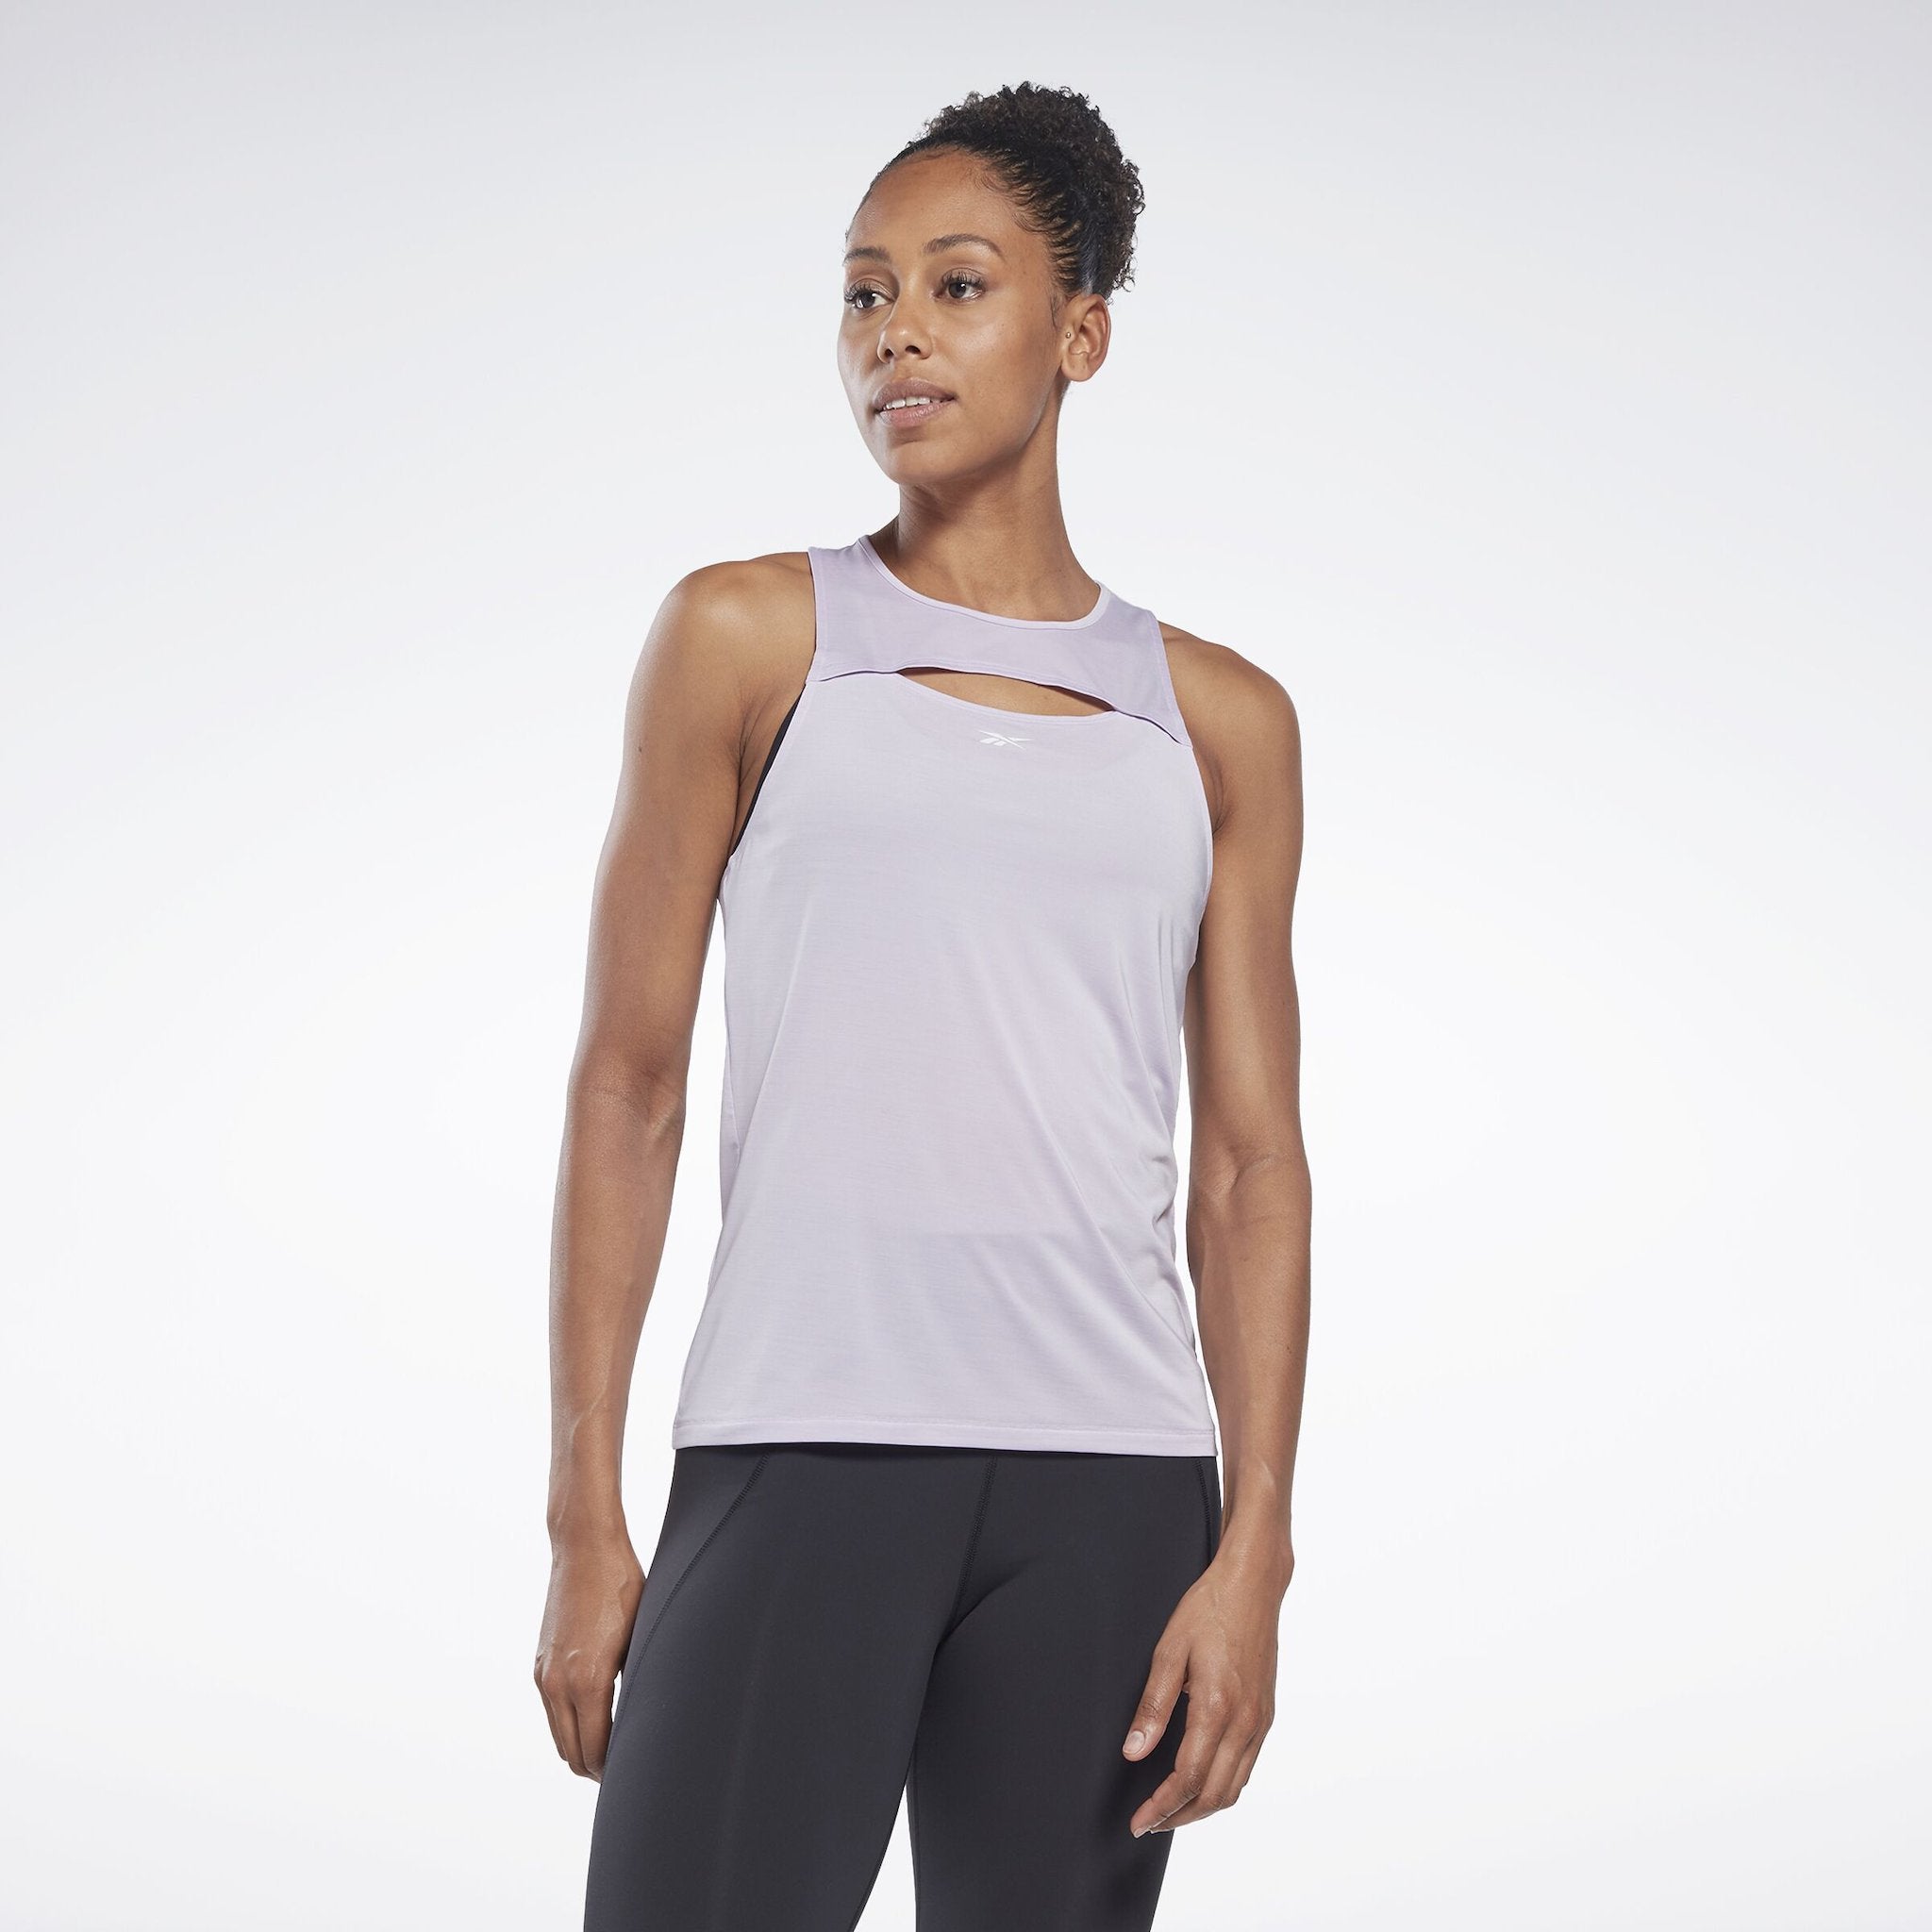 WOMENS ACTIV CHILL ATHLETIC TANK - HS4723